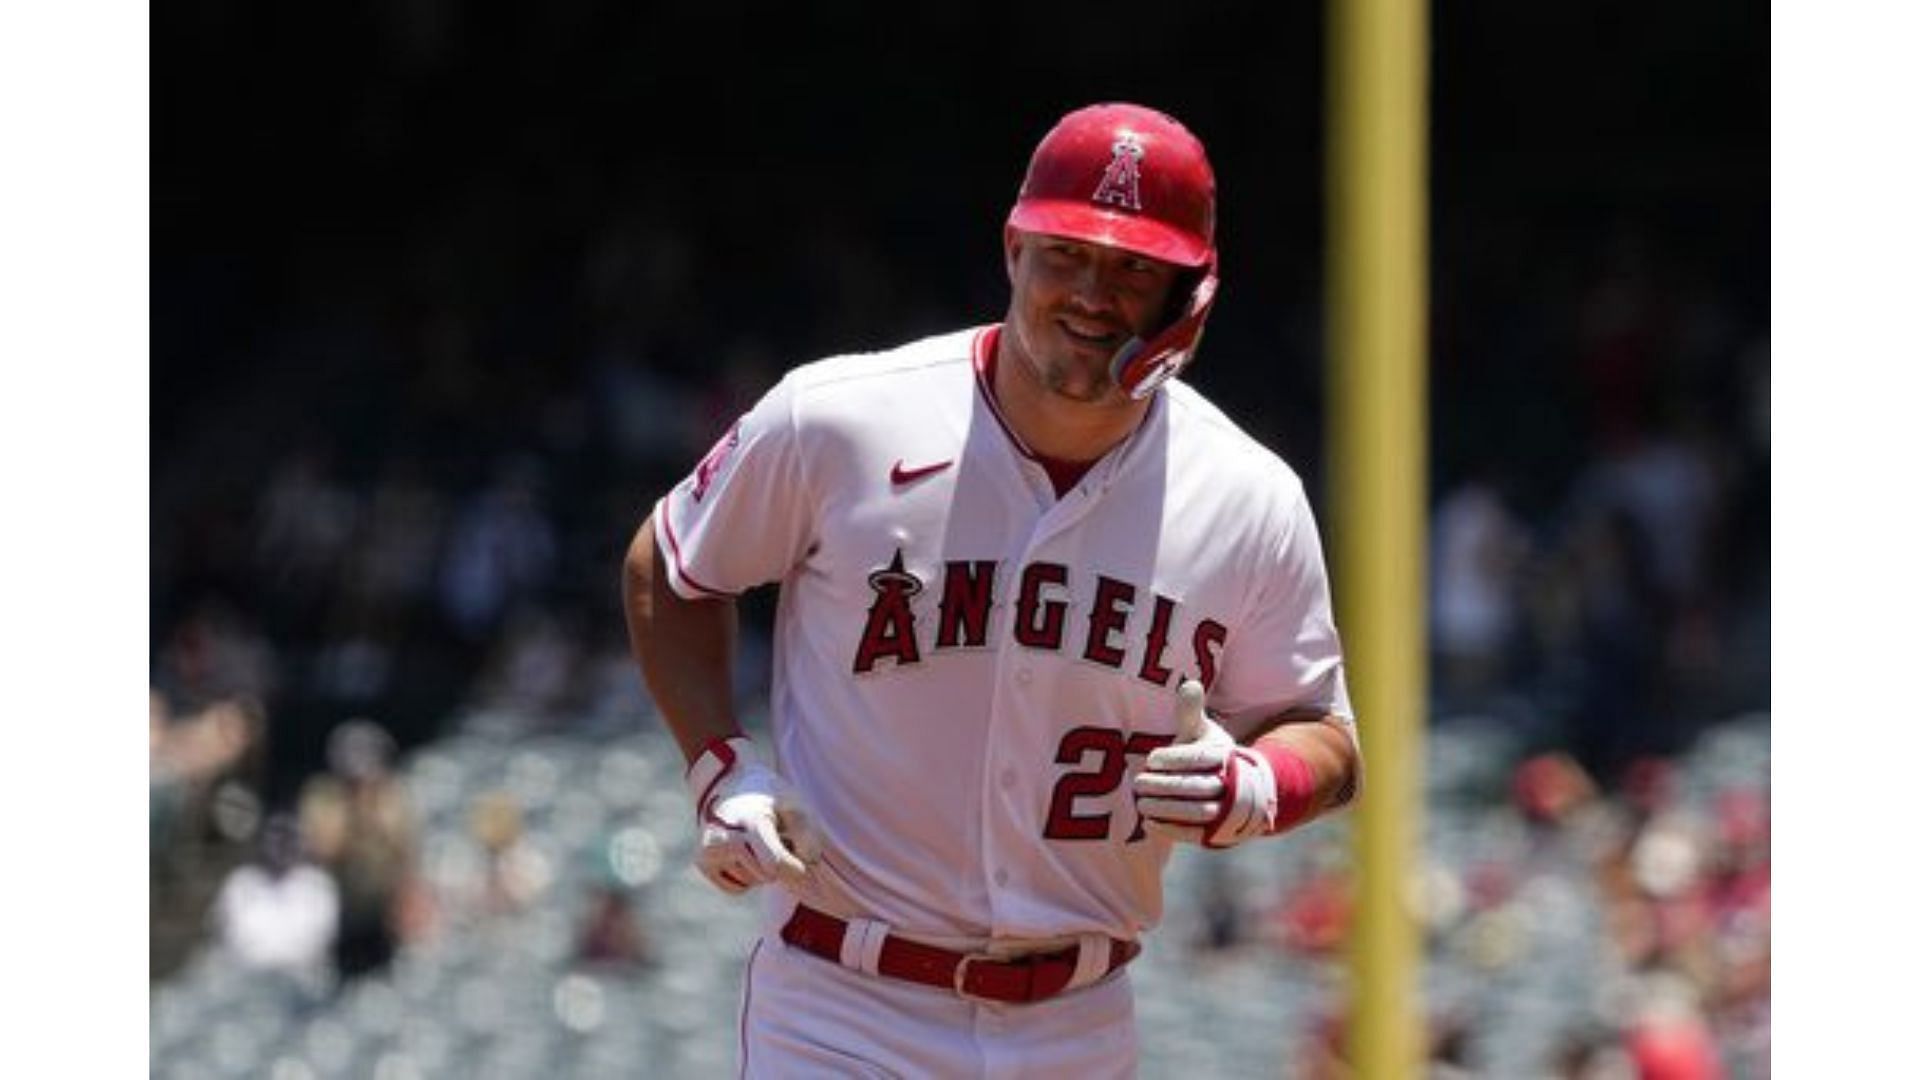 Mike Trout, Los Angeles Angels player